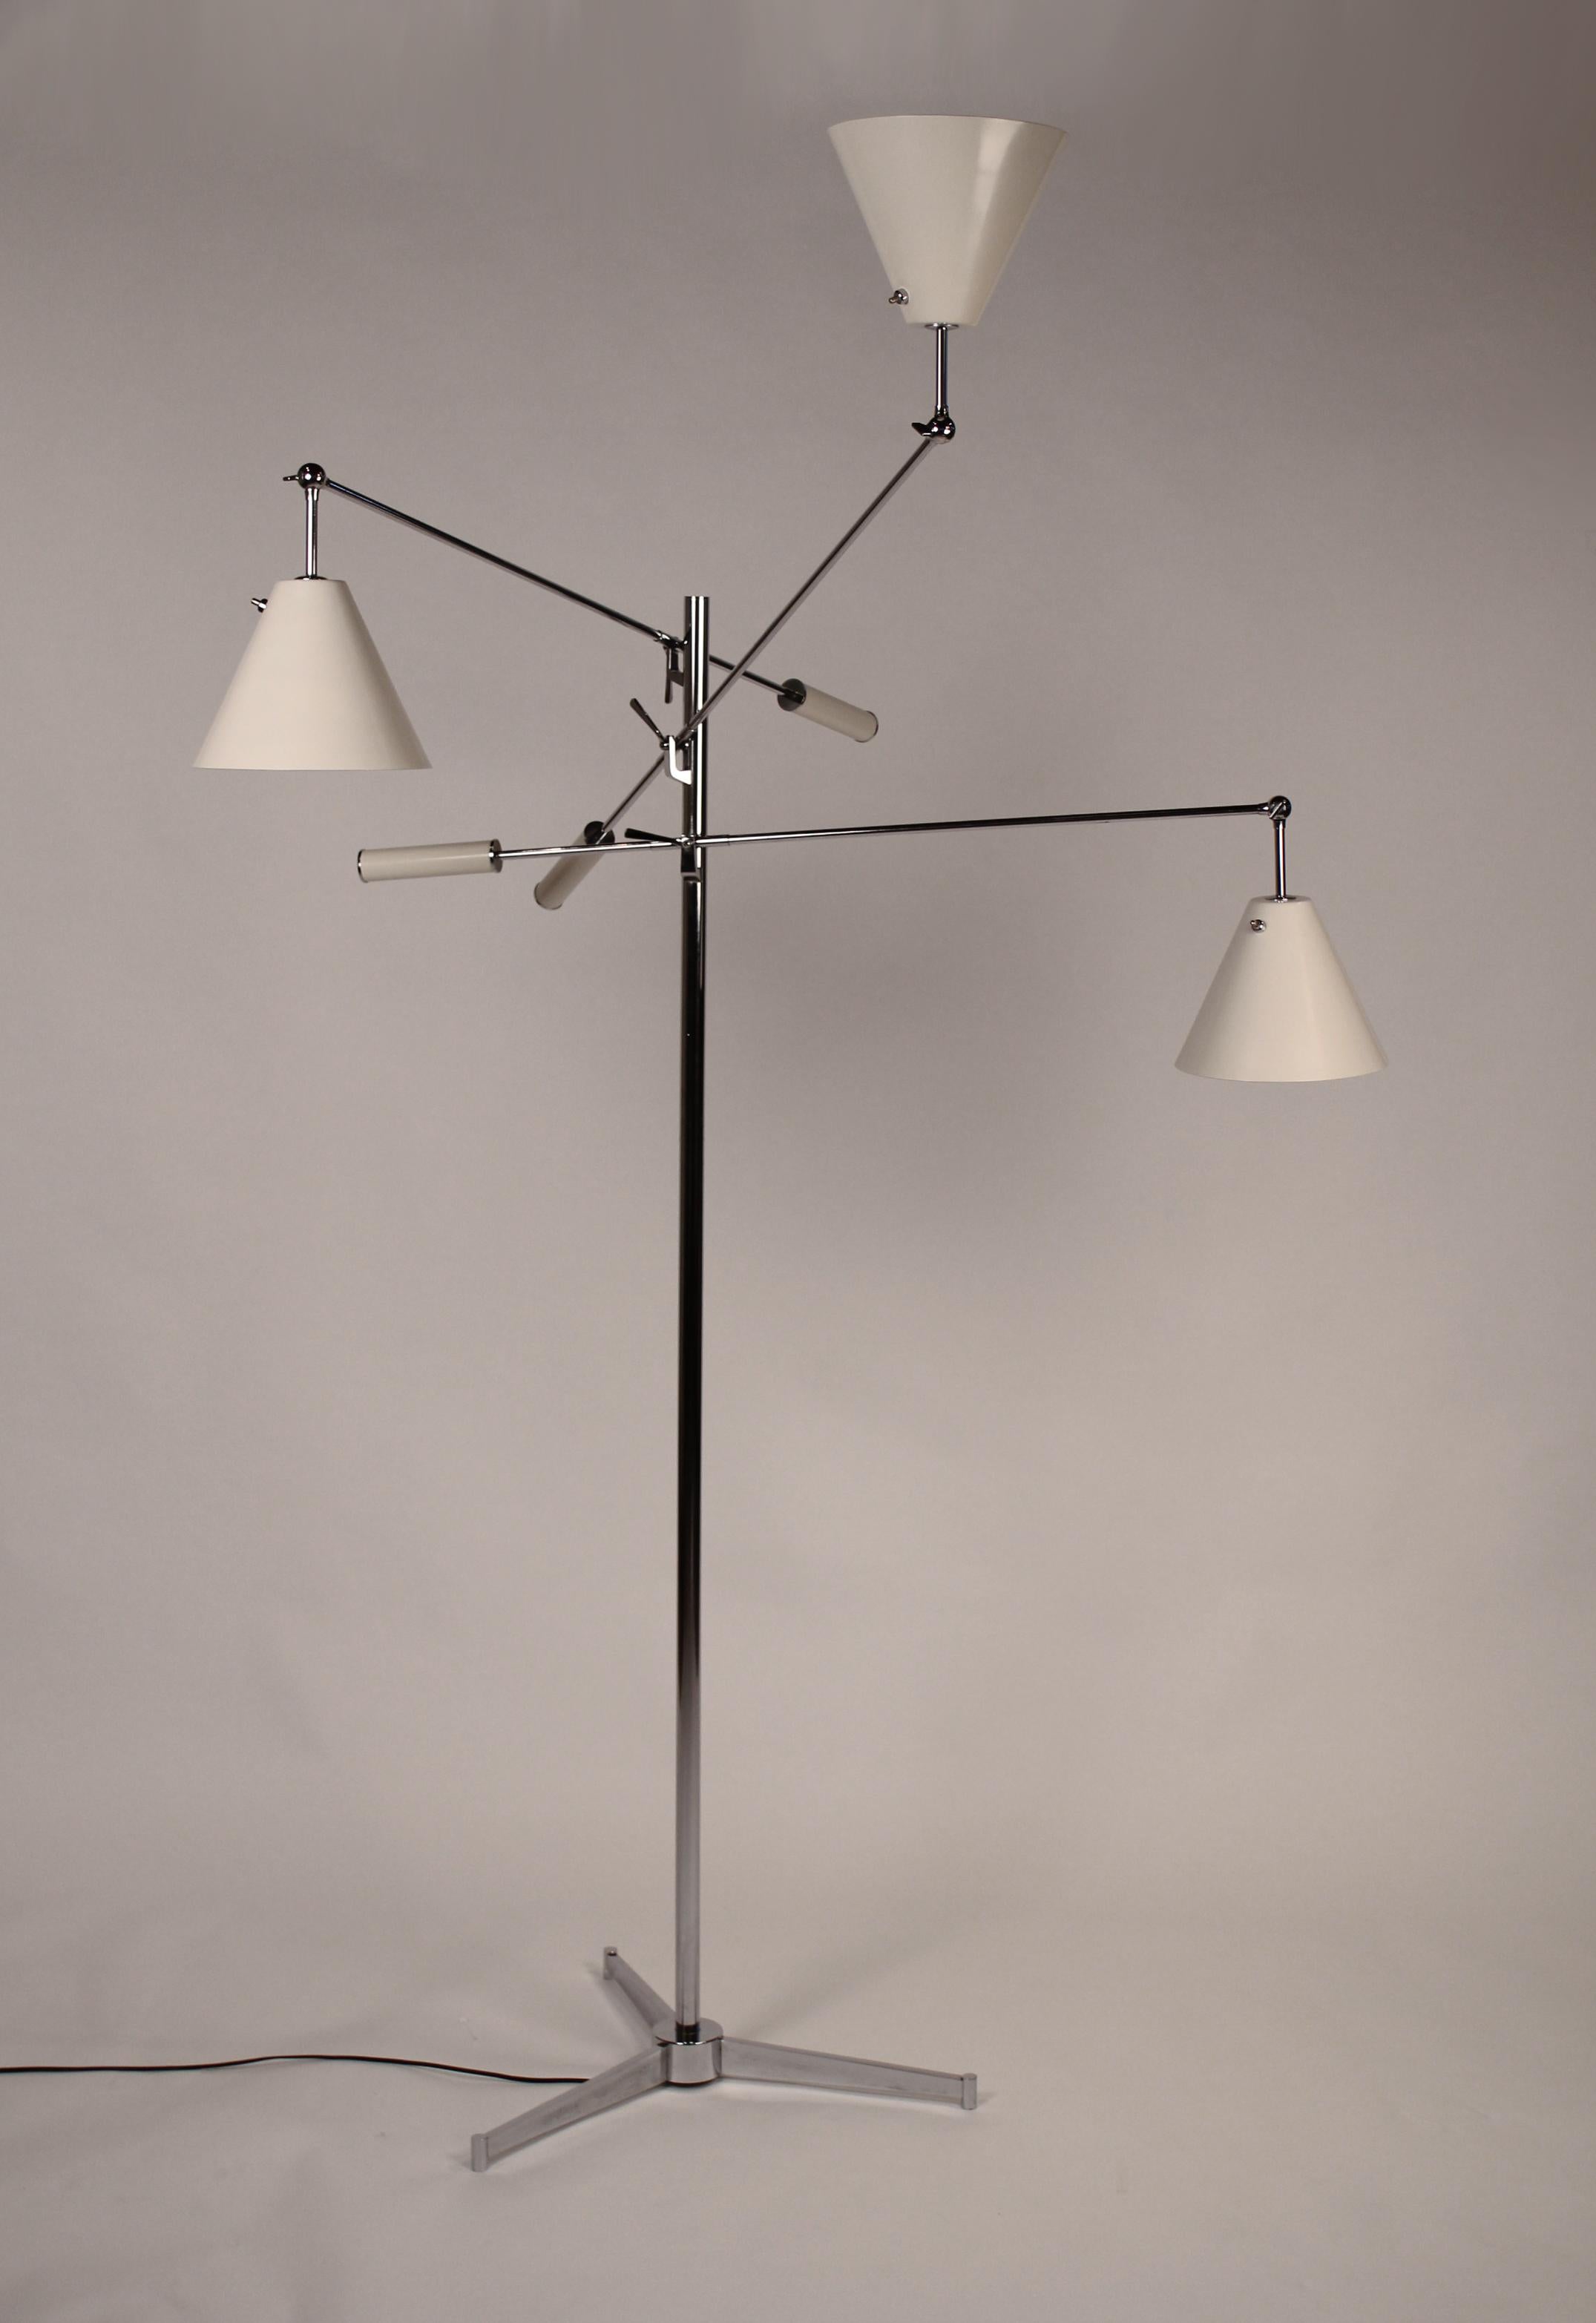 Early Arredoluce floor lamp in an off-white finish with tripod base designed by Angelo Lelii. Fully rewired and ready for installation. Signed to interior of shades.